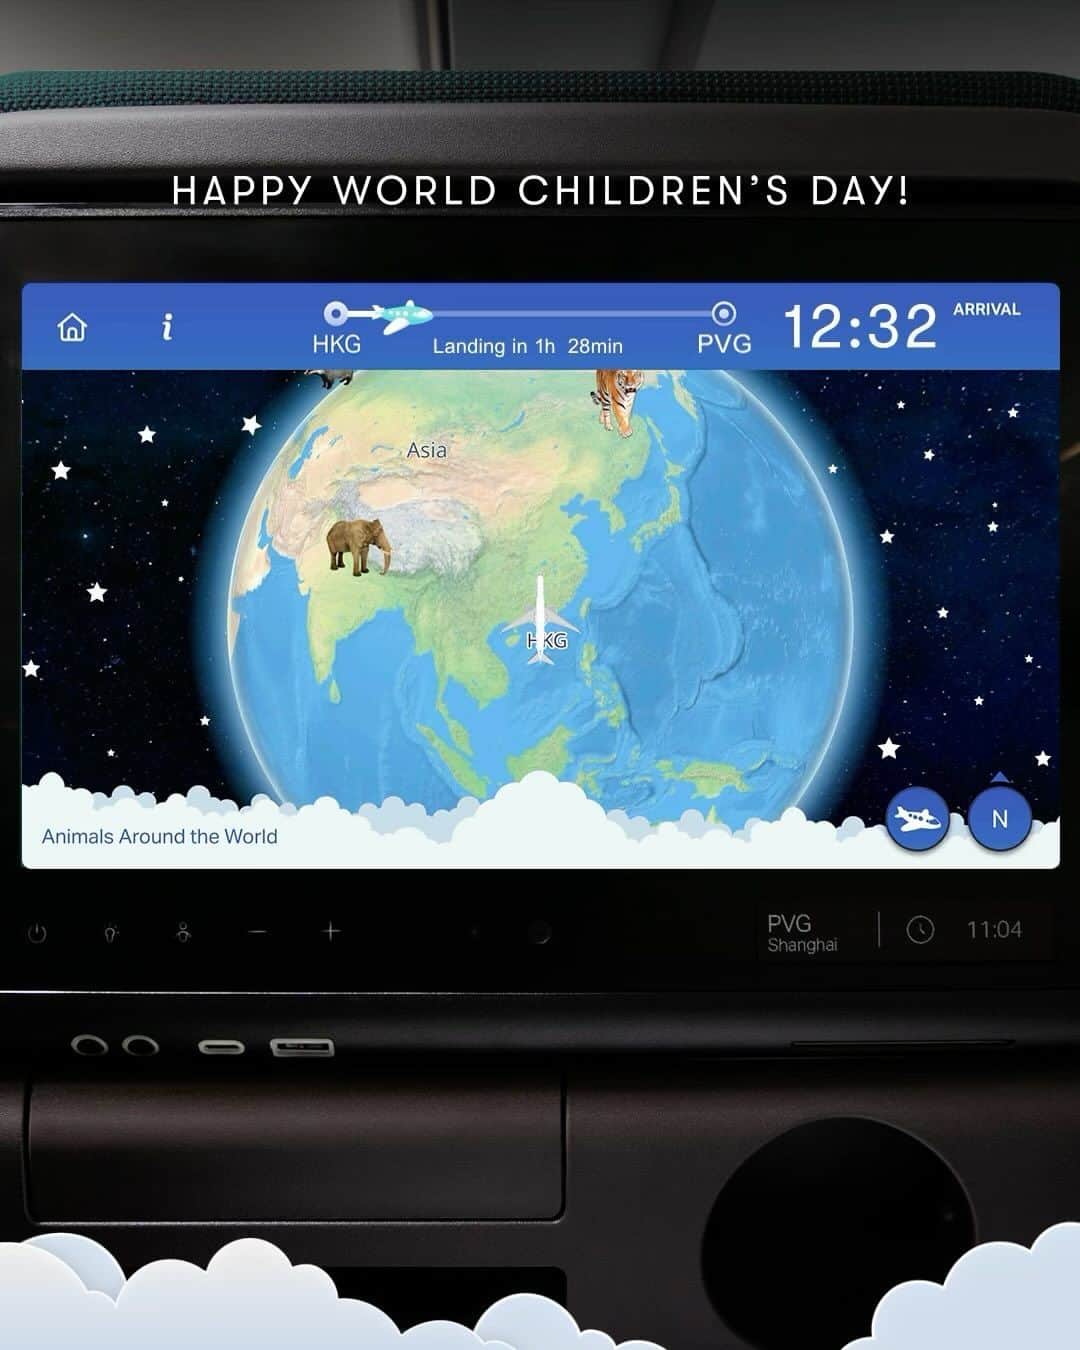 キャセイパシフィック航空のインスタグラム：「✨Happy World Children’s Day! ✨  🧒🏻 “I want the map with the lions and elephants!”  👦🏻 “Wow! Peppa Pig’s on!”  🧒🏻 “And there are so many other shows too! Wicked!”   Check out some of the IFE features they would surely appreciate on the next excursion.    💡 Kid-friendly language tailor-made for accessibility and fun: Intuitive UI for kids🌎  💡 Kids map and flight information for all inflight curiosities: A world to explore even before arrival on the IFE🗺️  💡 More trending kids content: “Peppa Pig”, “SpongeBob Squarepants” and more exciting shows, albums and games to keep every flight fresh and fun🎥   We're always on the lookout for more content and ways to refine our IFE for Cathay passengers, click the link in Bio.   #cathaypacific #MoveBeyond   正值世界兒童日，讓我們歡迎每位準備出發的小朋友登機✨！   🧒🏻：「這個地圖上有獅子和大象！」  👦🏻：「哇，小豬佩奇！」  🧒🏻 ：「太好了，還有好多節目可以一起看！」   我們為兒童乘客準備好一系列益智有趣的機上娛樂，讓他們度過輕鬆有趣的空中之旅！   💡 為兒童度身訂造的語言使用者介面🌎   💡 專為兒童乘客而設的世界地圖及航程資訊，滿足他們探索世界的好奇心🗺️  💡 更多兒童最愛內容：盡情觀看《Peppa Pig》、《海綿寶寶》等人氣節目、音樂及遊戲，將機艙化身小朋友的夢想樂園🎥   我們不斷改進機上娛樂系統，讓每位乘客在旅途中體驗最佳的視聽享受。了解更多我們的機上娛樂：點擊Bio Link   #國泰航空 #志在飛躍」